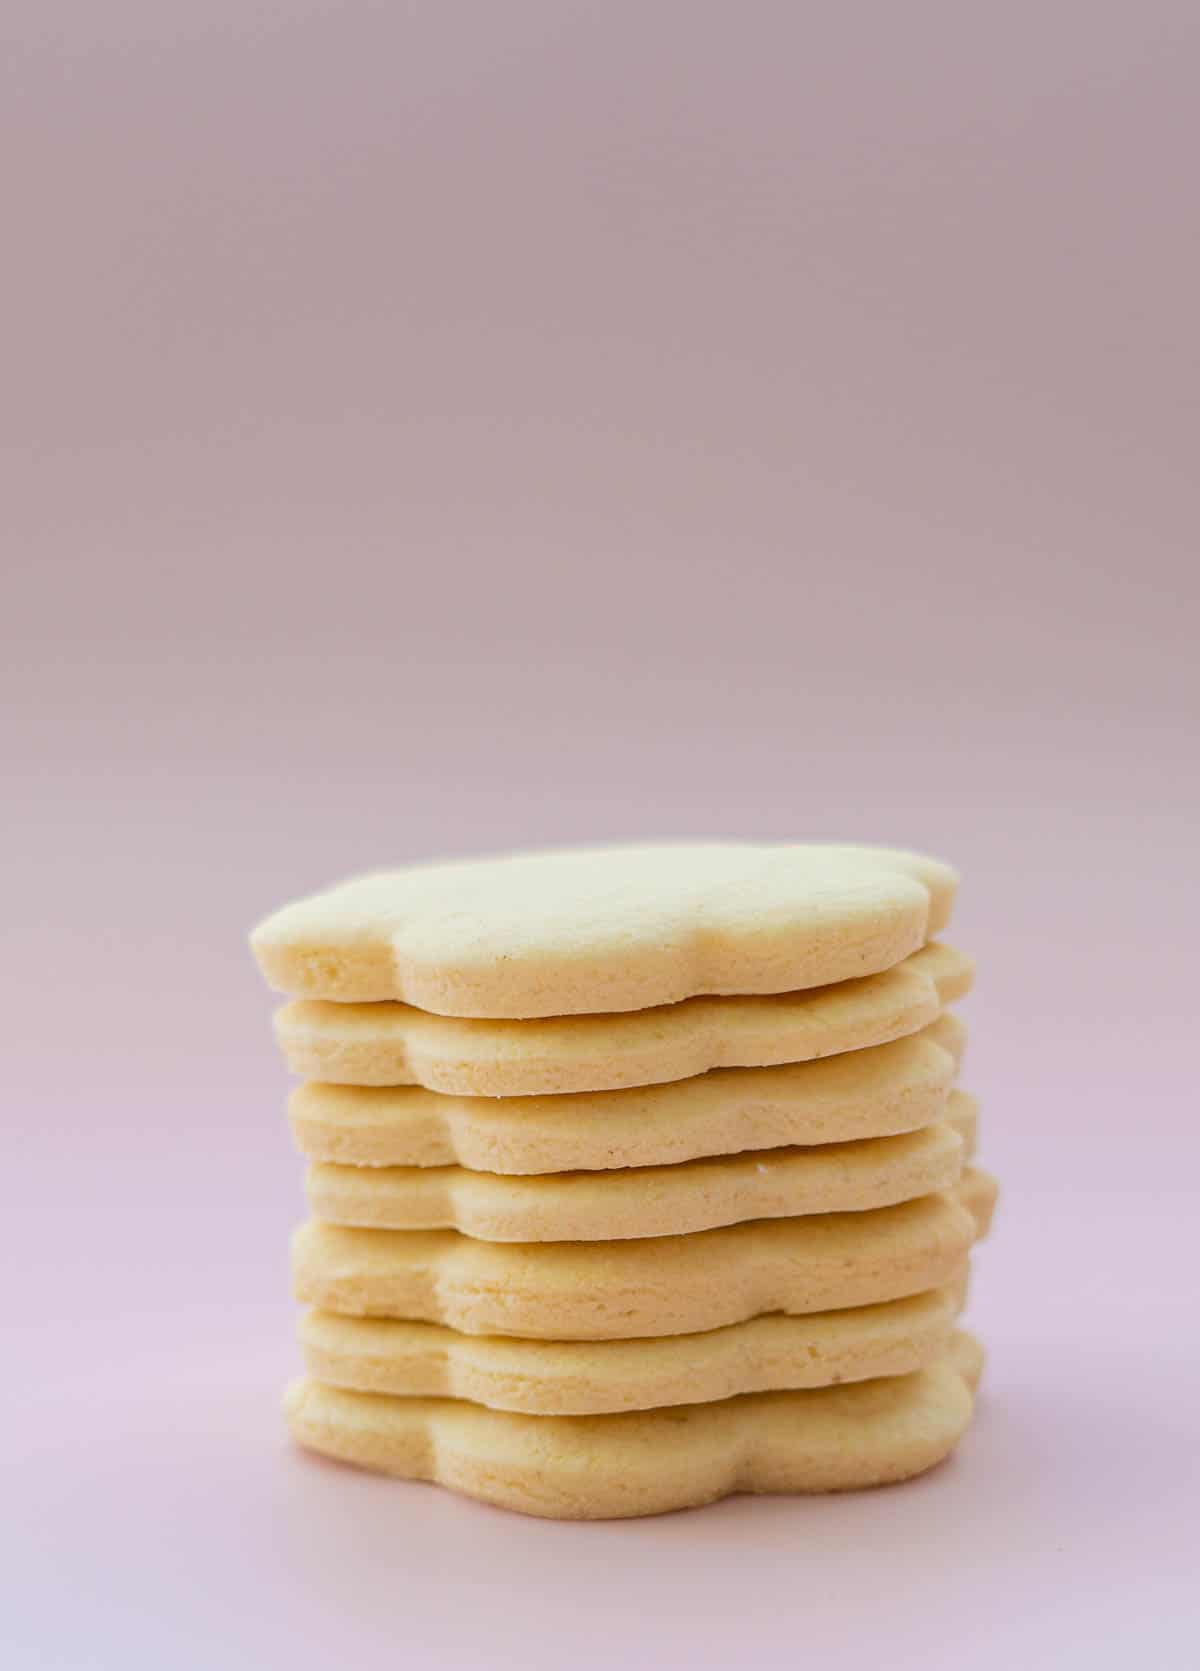 A tower of seven flower shaped cookies on a pink background